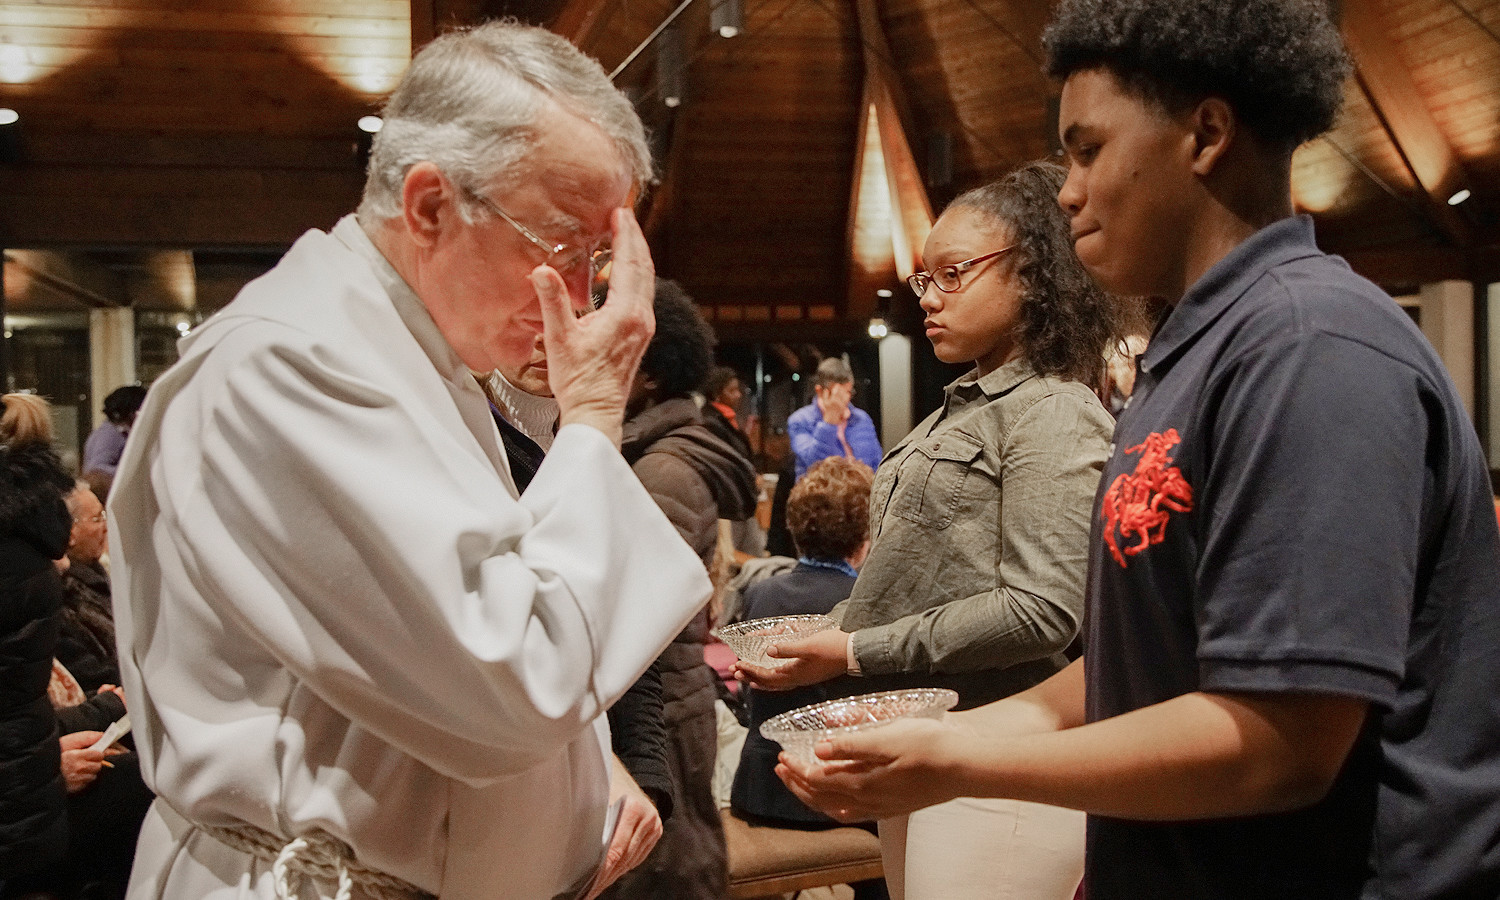 Father Jerry Deponai, pastor of St. Anthony’s, blesses himself with the Lourdes holy water.